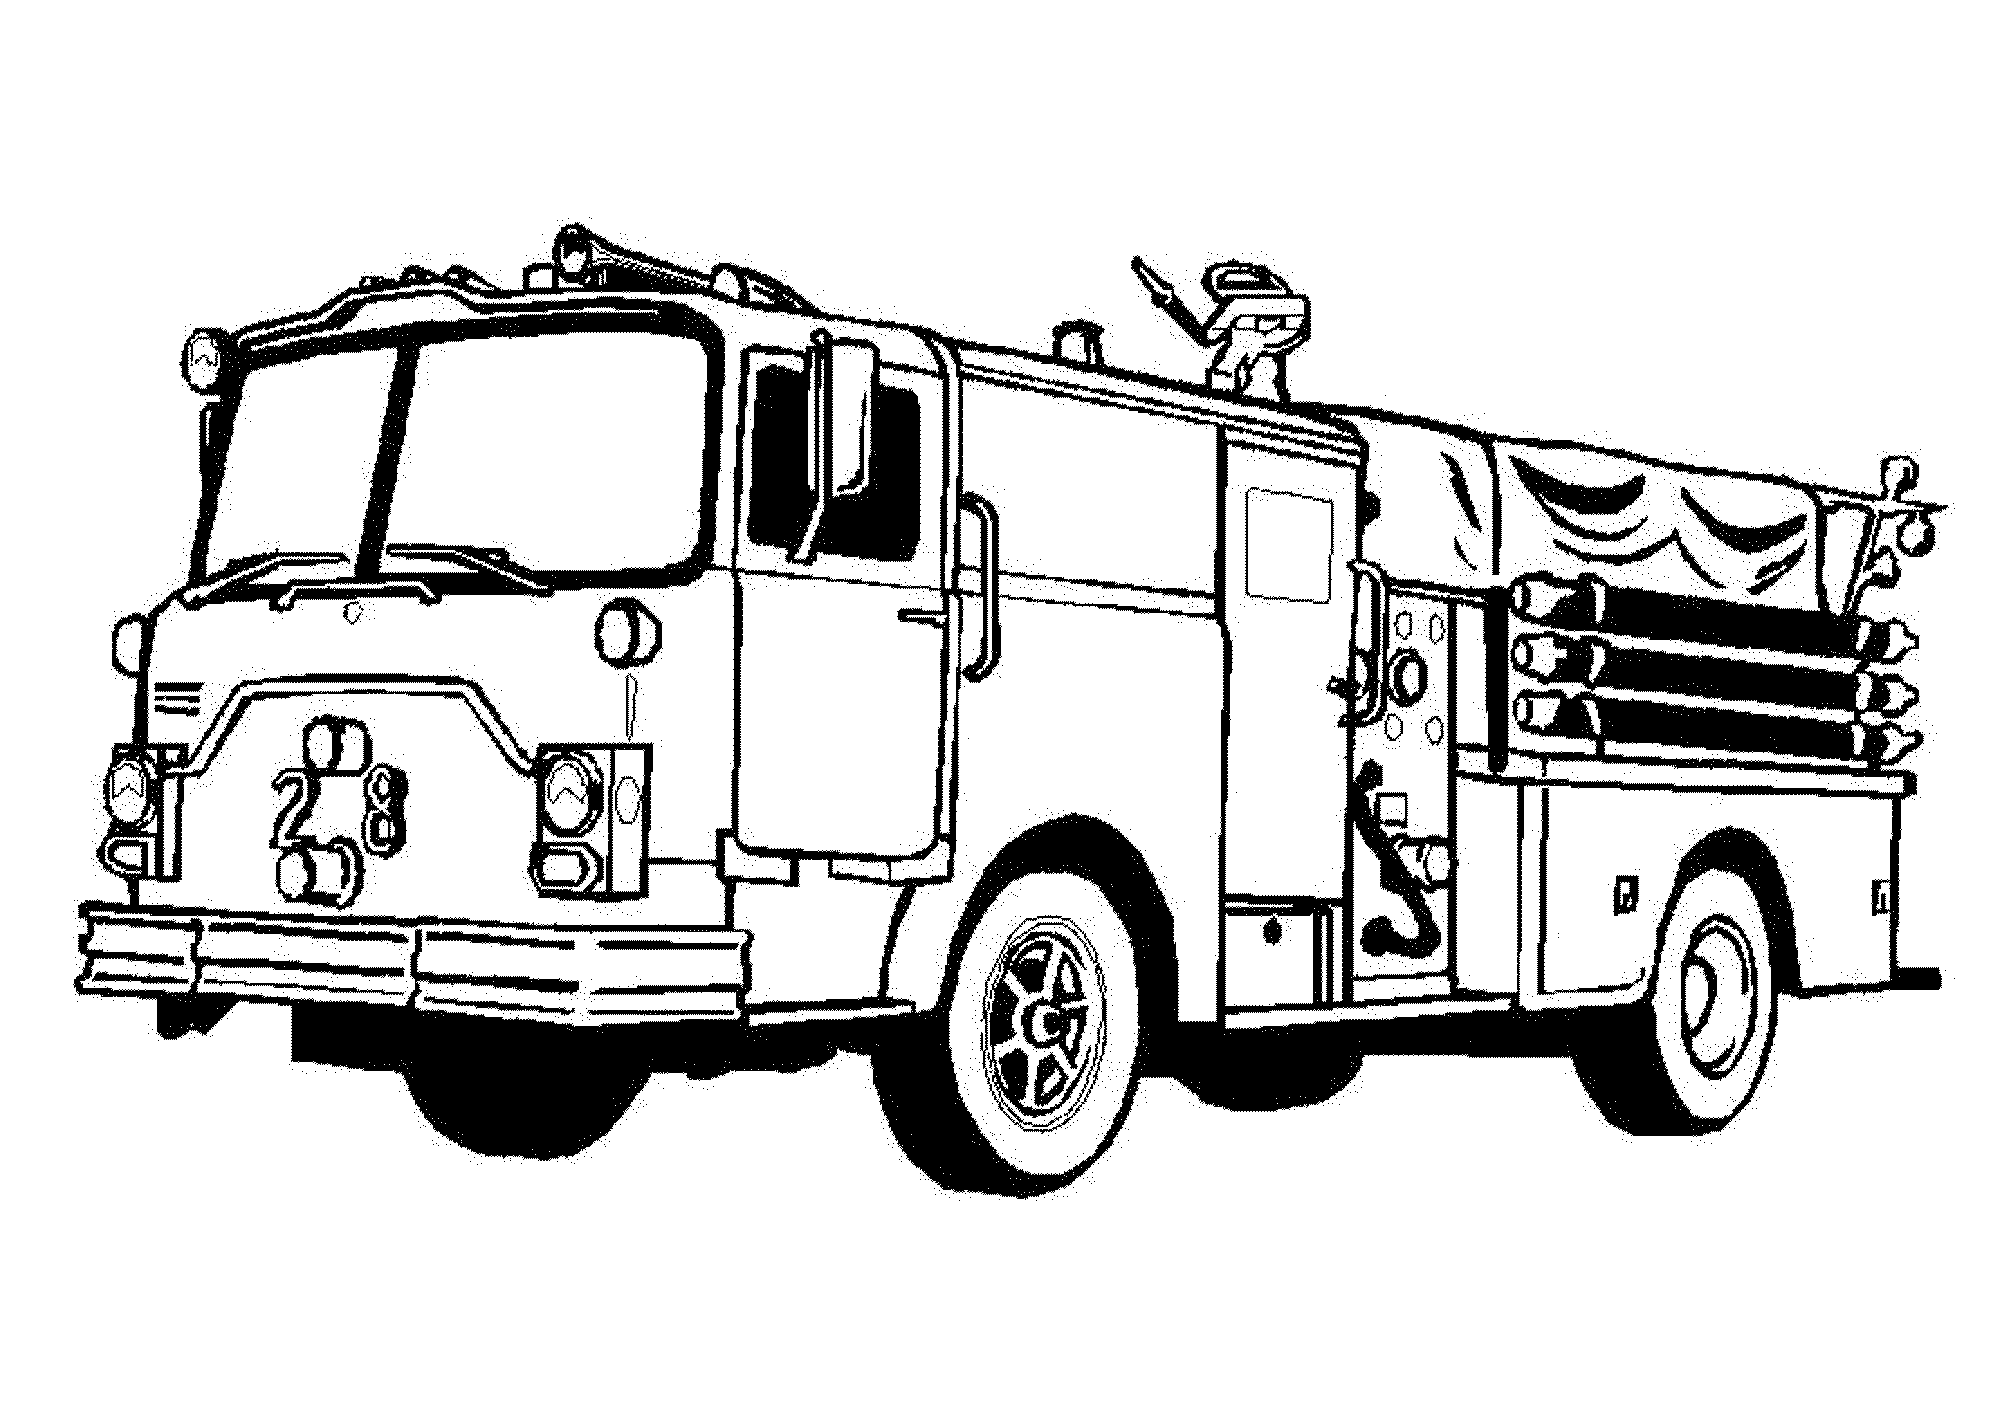 Lego Fire Truck Coloring Pages at GetDrawings | Free download